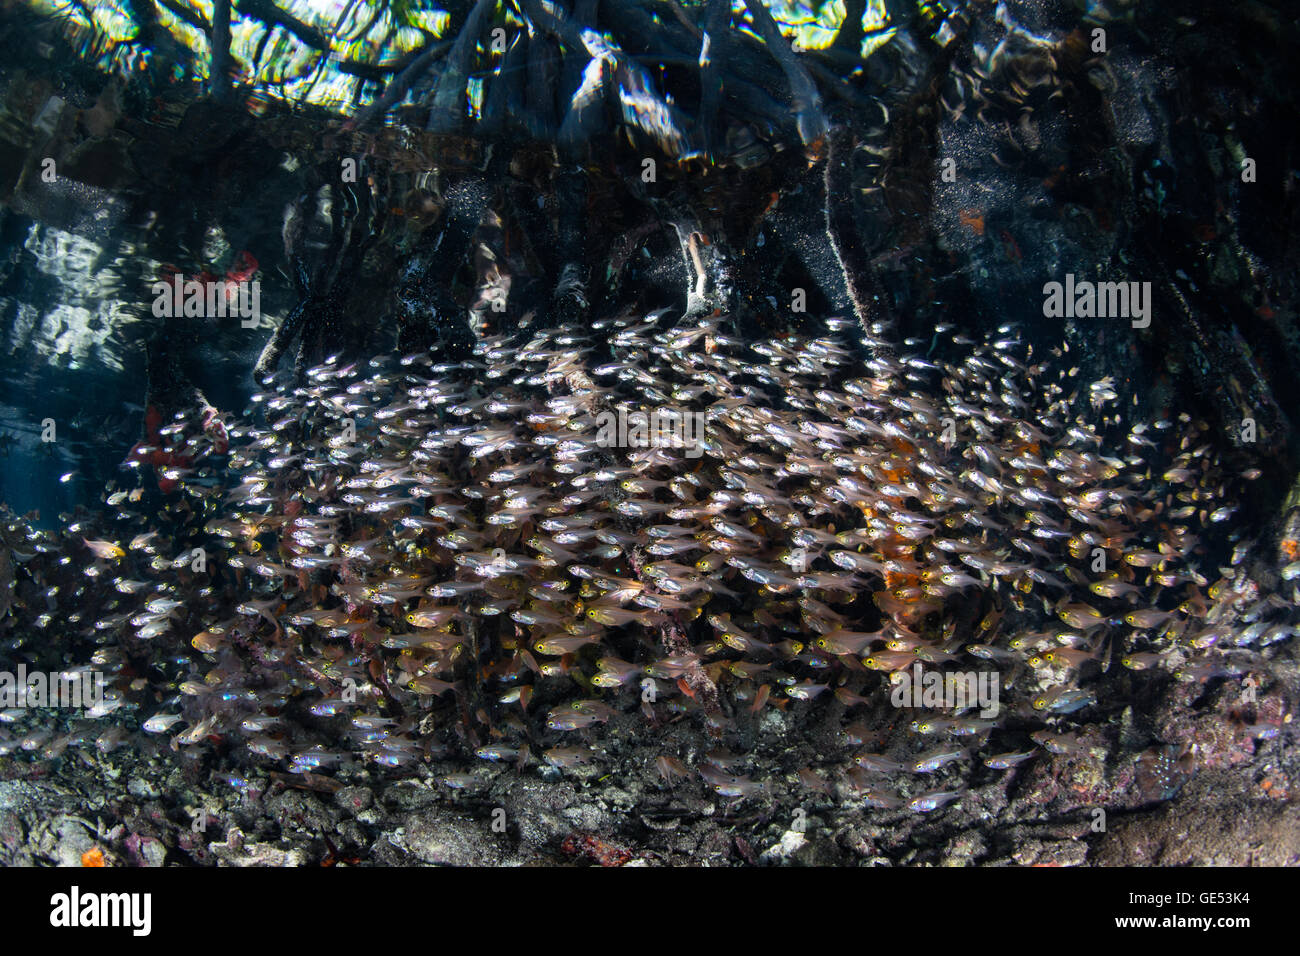 Tiny fish swarm along the edge of a mangrove forest in Raja Ampat, Indonesia. Mangroves serve as nurseries for many species. Stock Photo